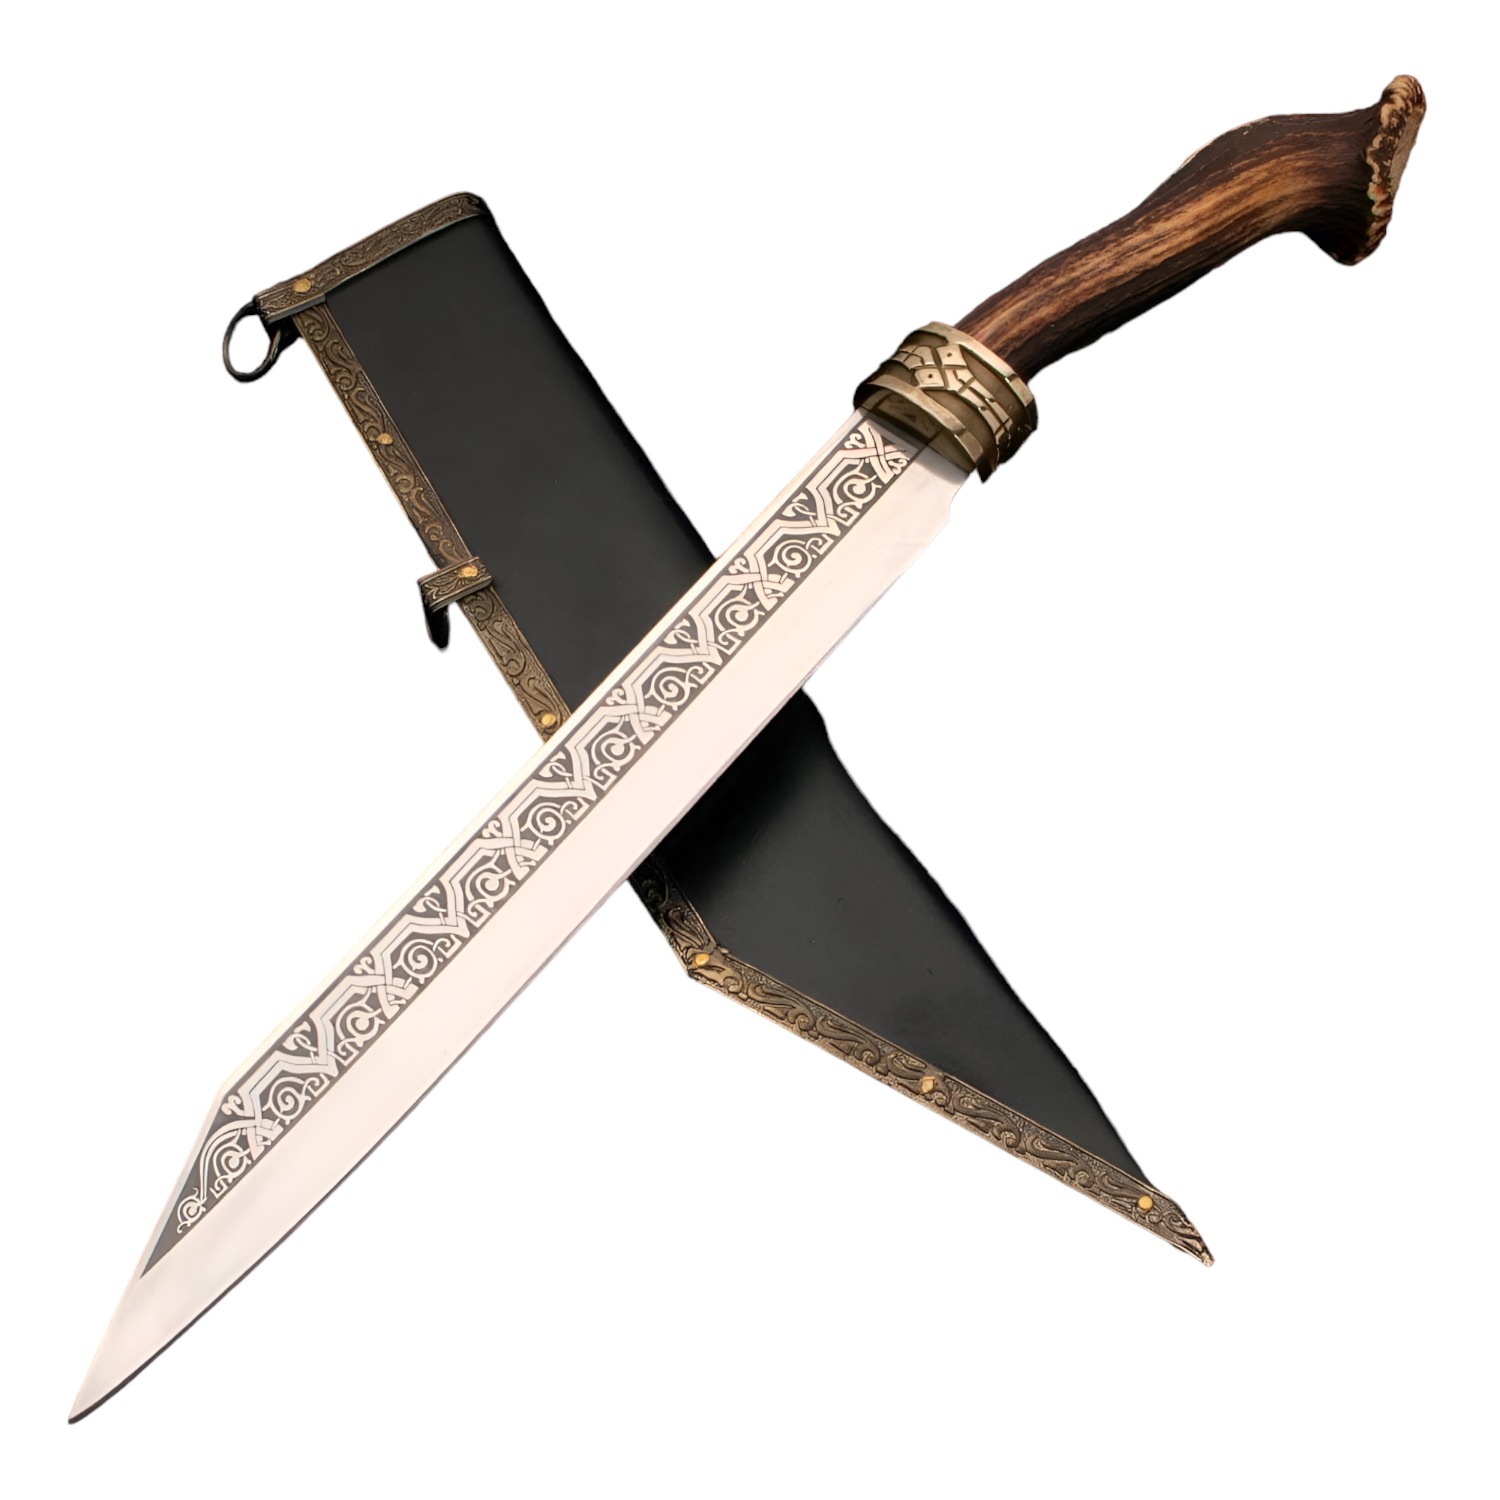 Main Engraved Royal Stag Seax used by Viking Chieftains With Scabbard